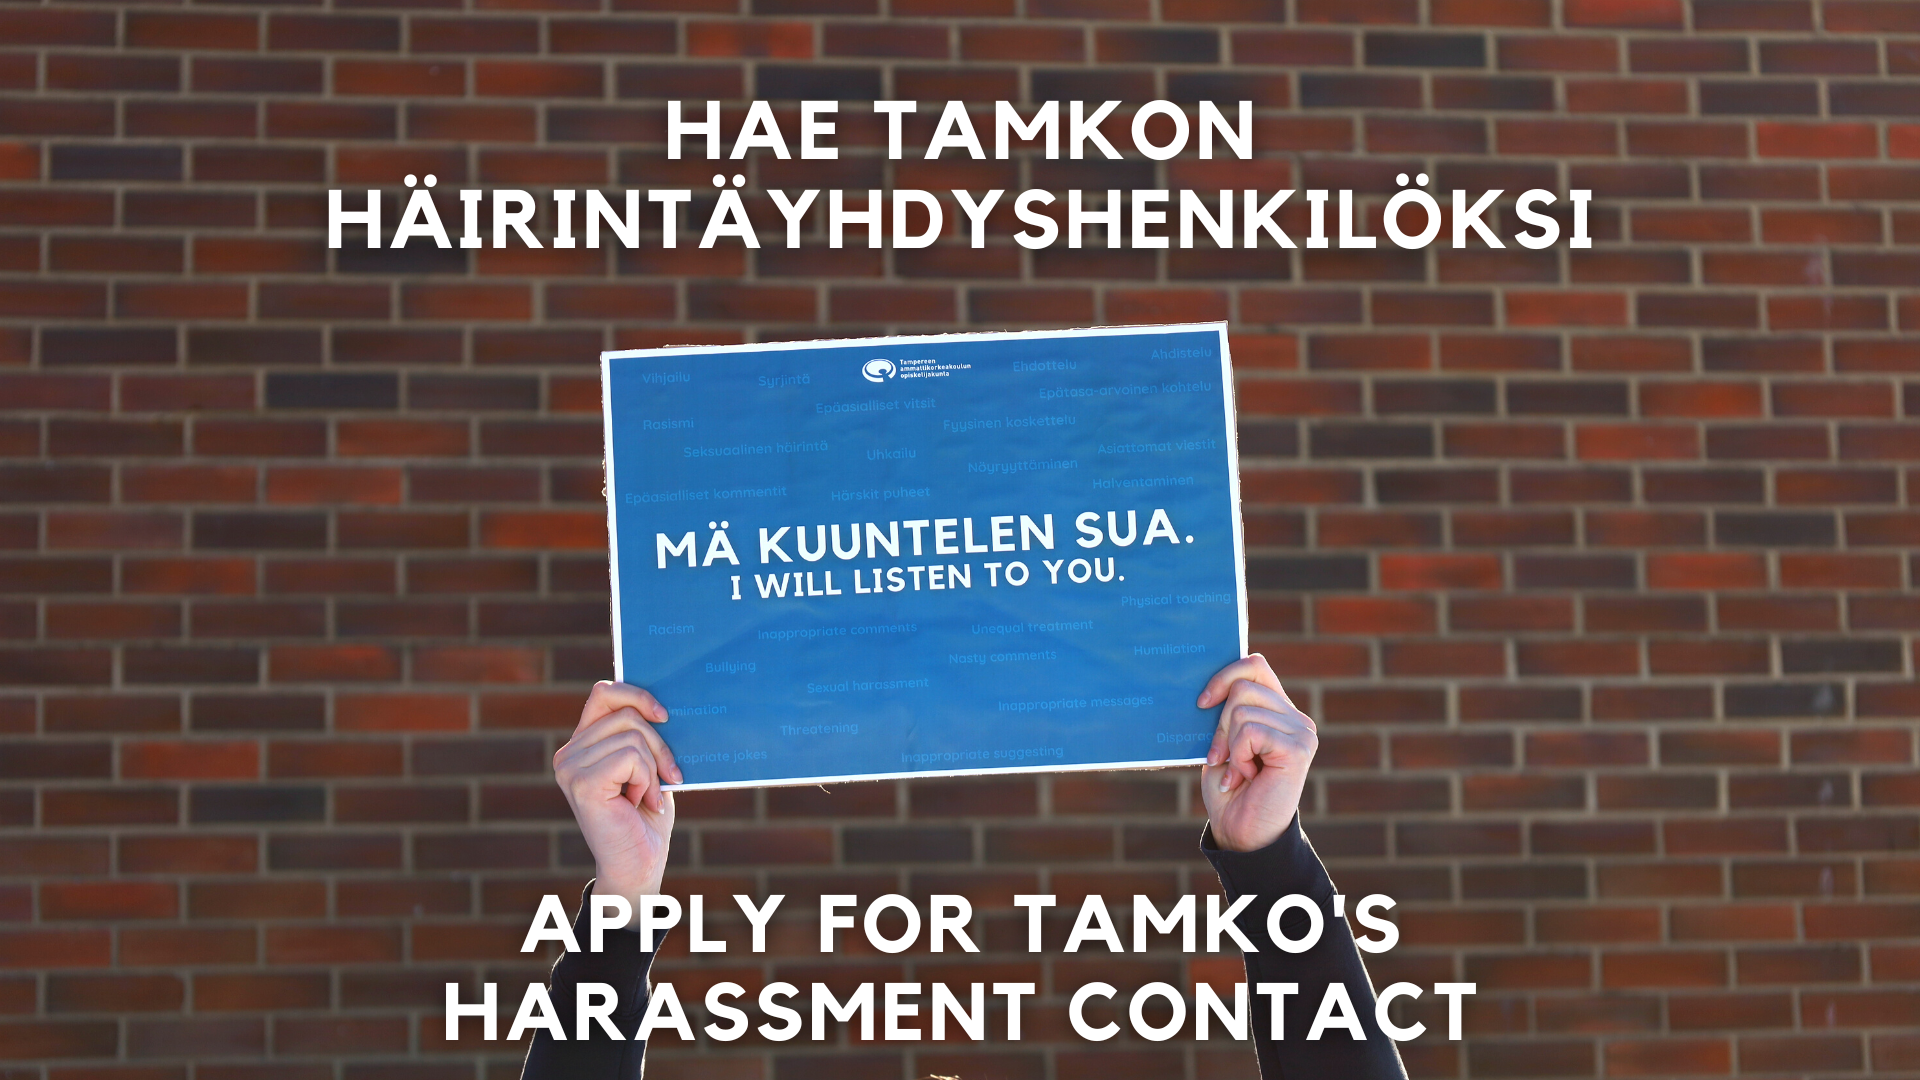 We are seeking new Harassment Contact Persons for the Student Union!